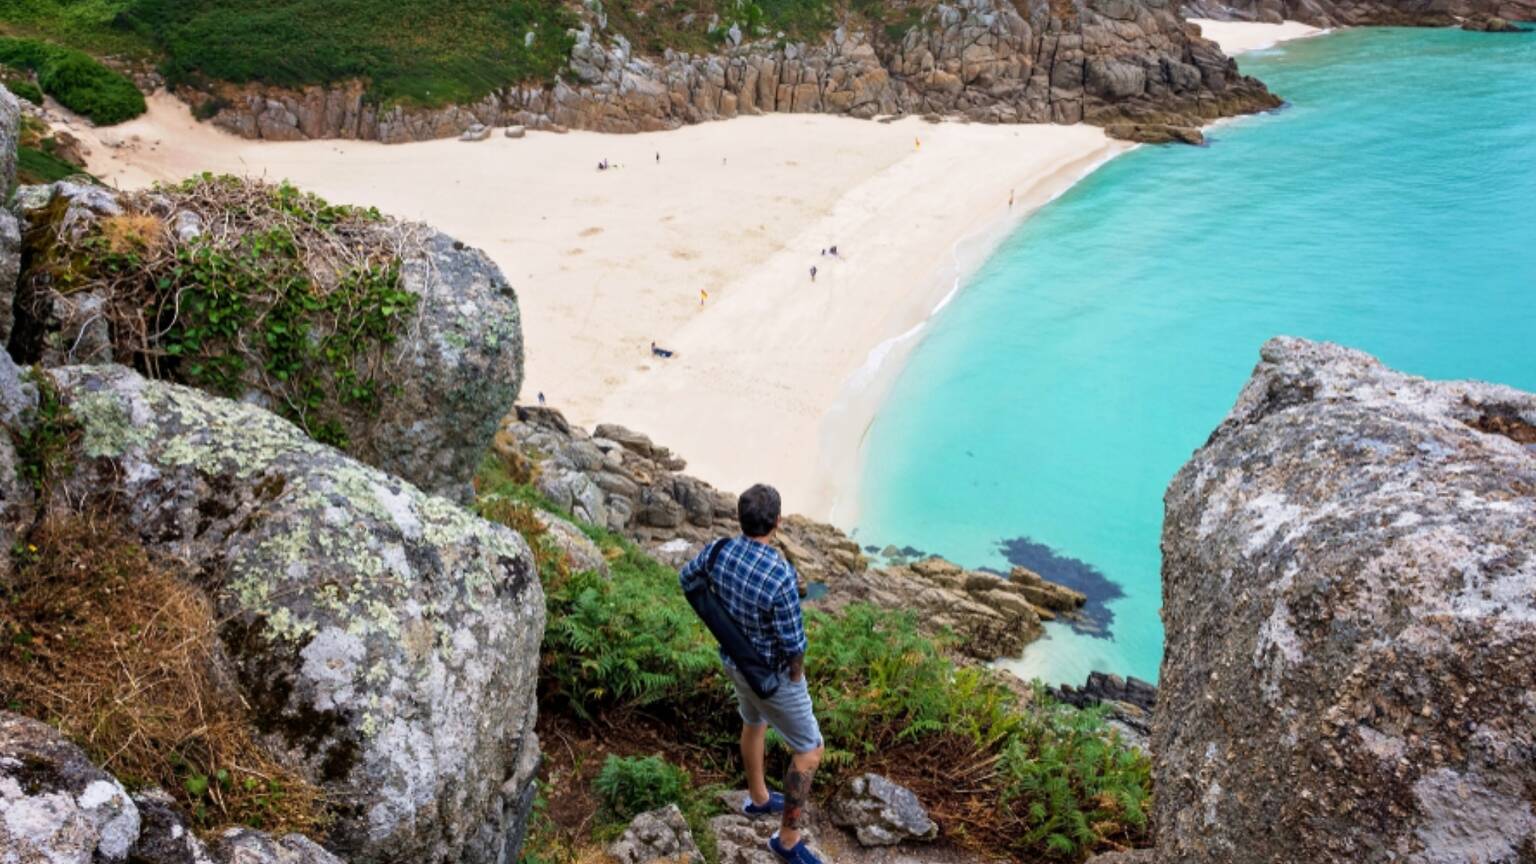 Revealed: These are Officially the 10 Most Beautiful Beaches in the UK